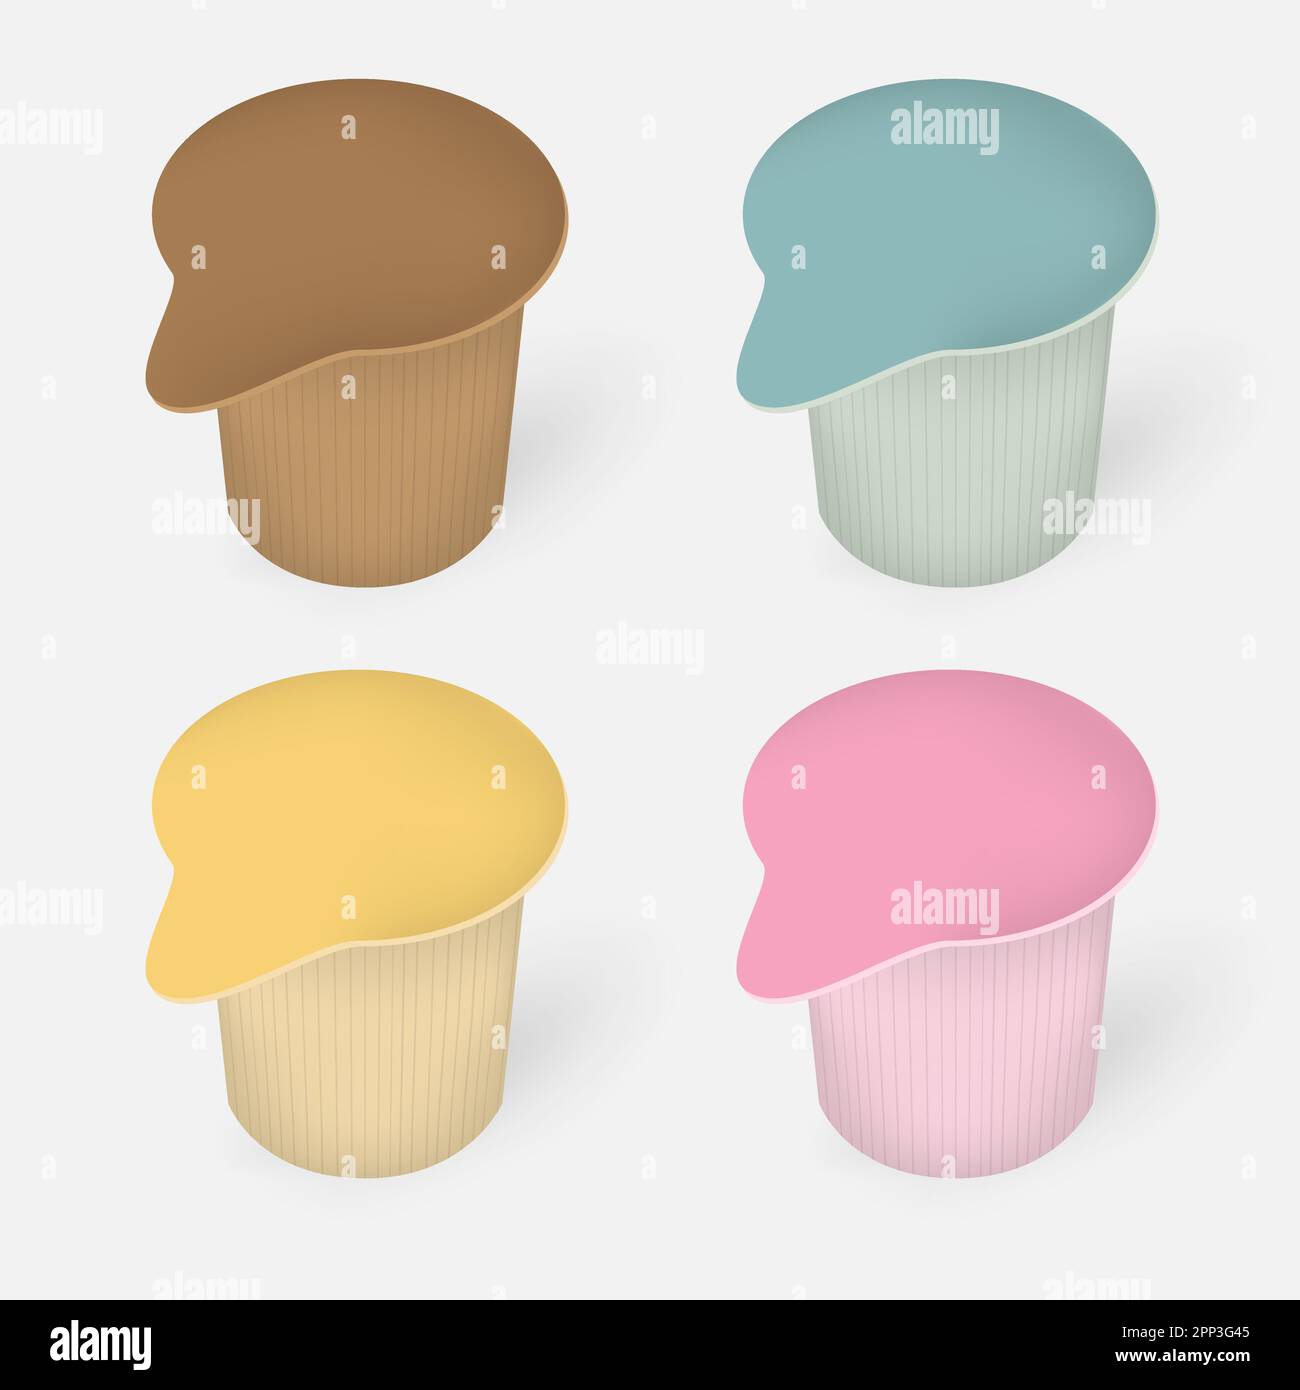 https://c8.alamy.com/comp/2PP3G45/liquid-creamer-single-colored-package-vector-template-coffee-cream-plastic-container-mock-up-2PP3G45.jpg